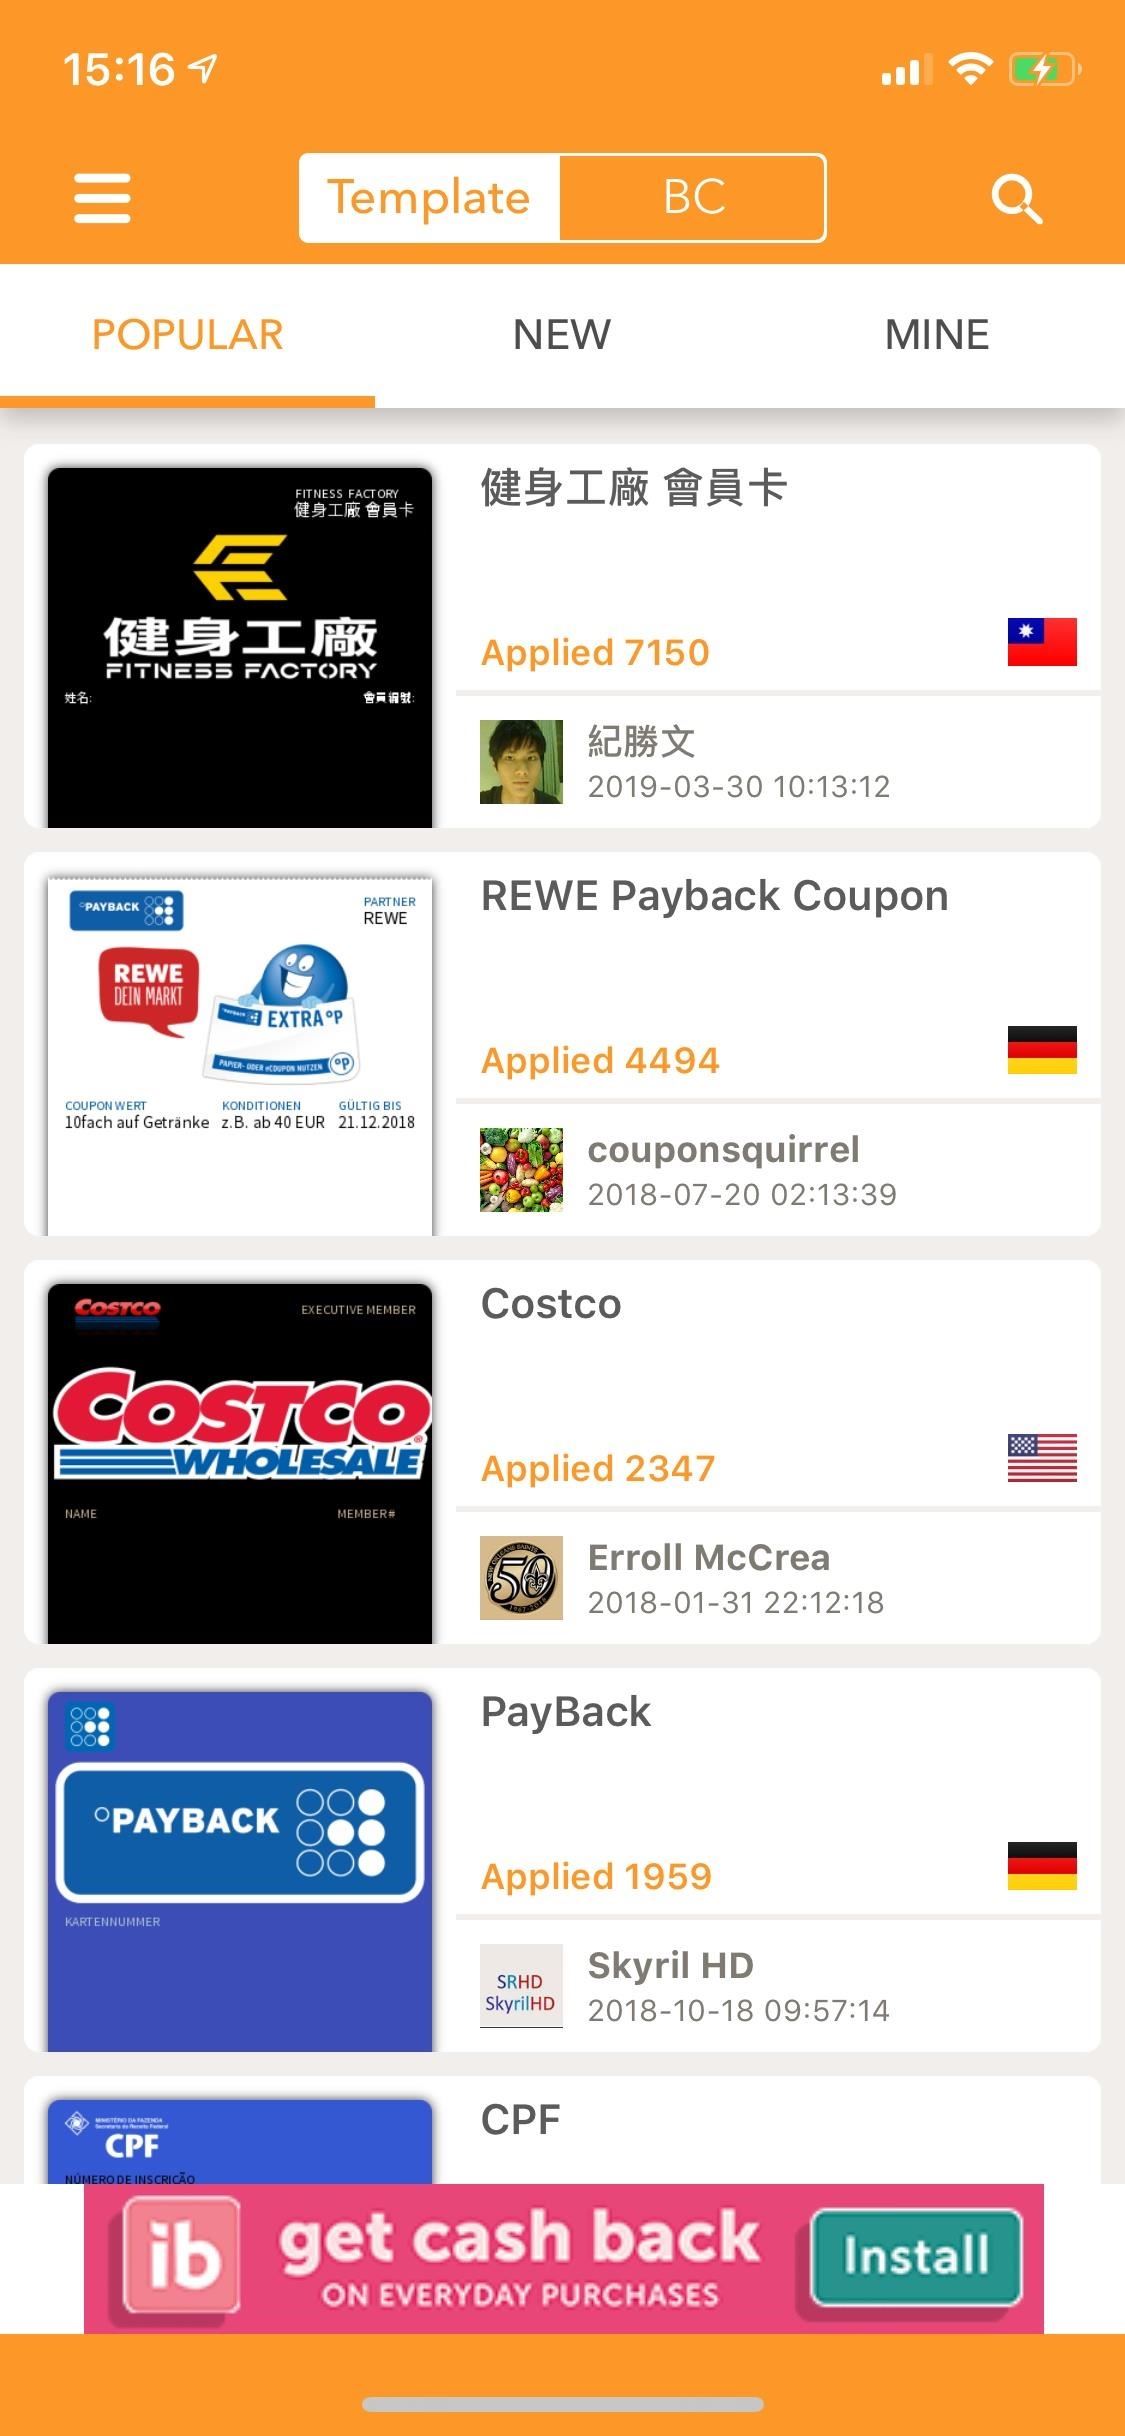 How to Add Unsupported Cards and Passes to Apple Wallet for Quick, Easy Access on Your iPhone